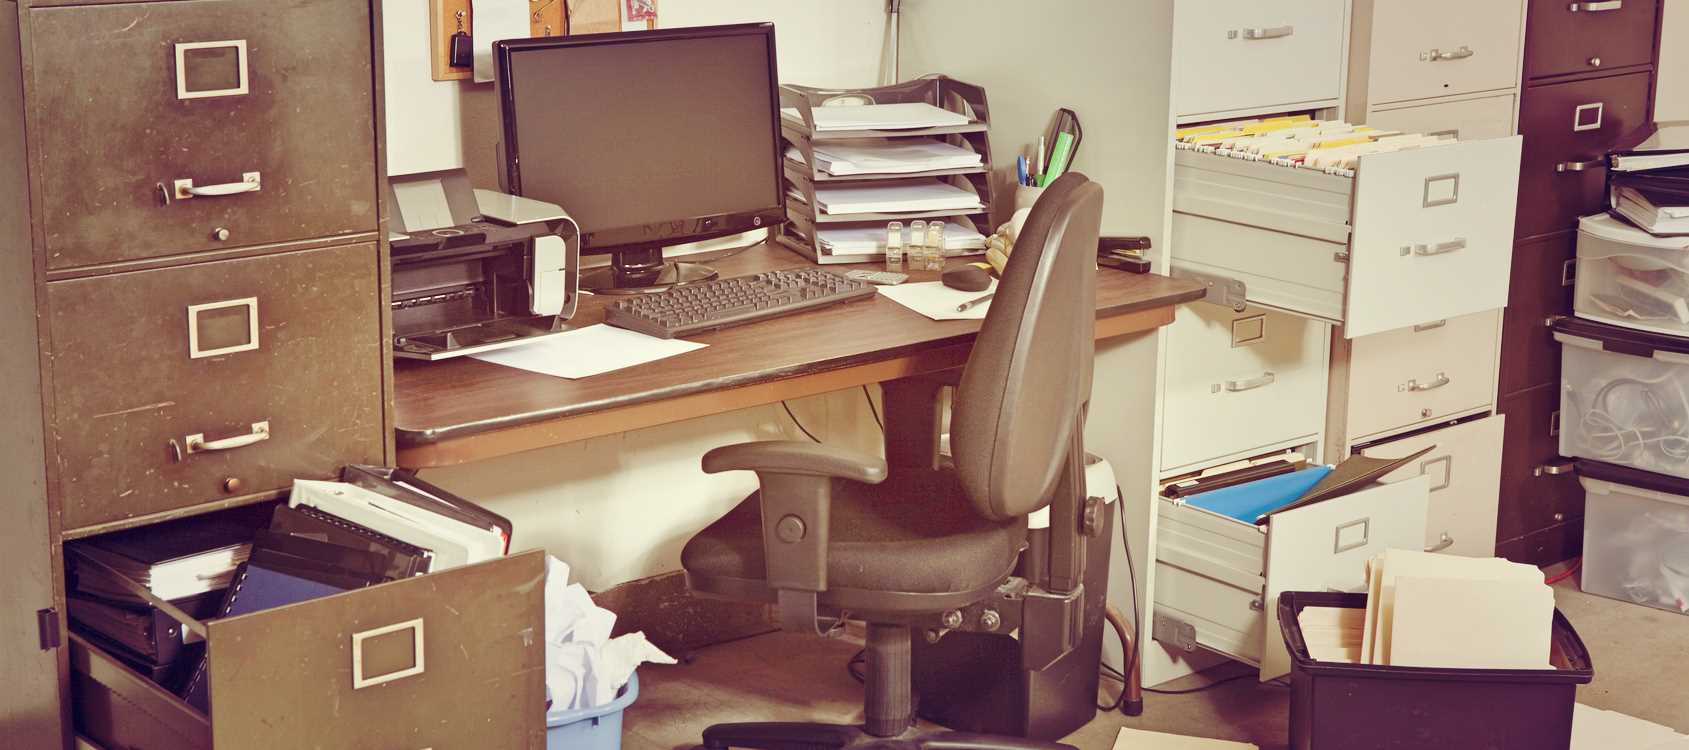 Office Junk Removal & Clean Out Service and Cost in Tucson ARIZONA